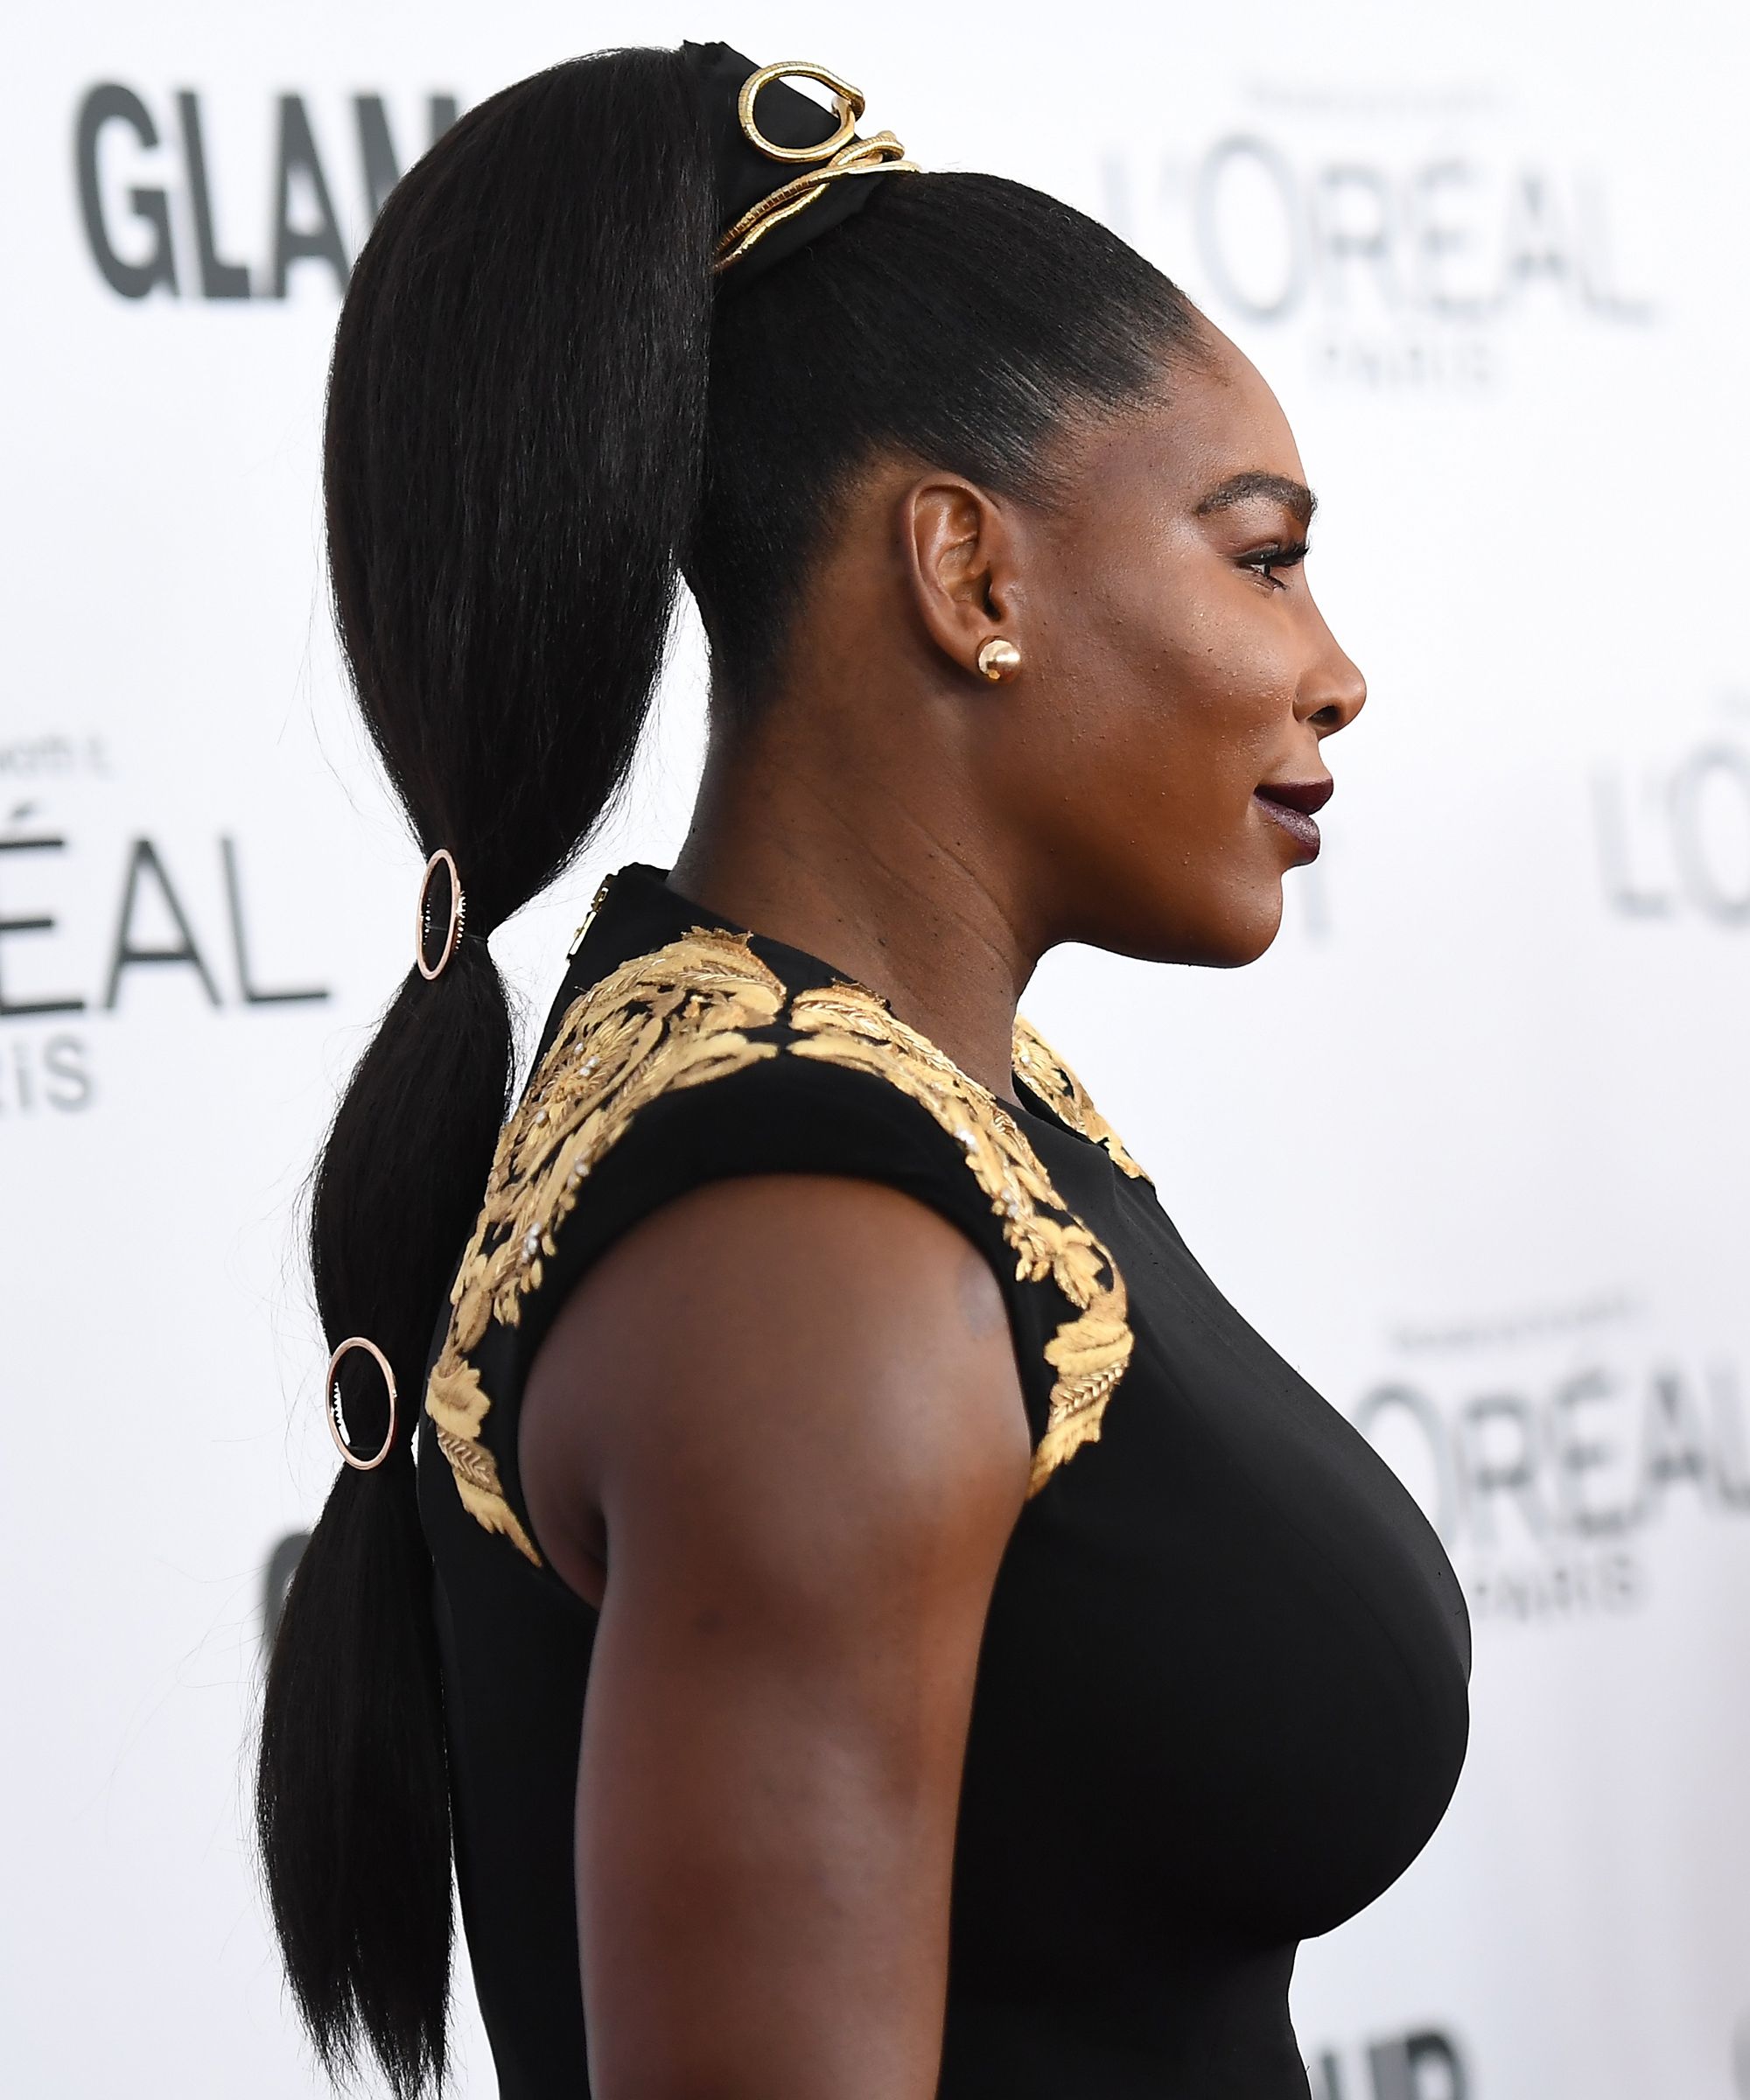 serena williams always wears these 5 beauty trends & no one has noticed